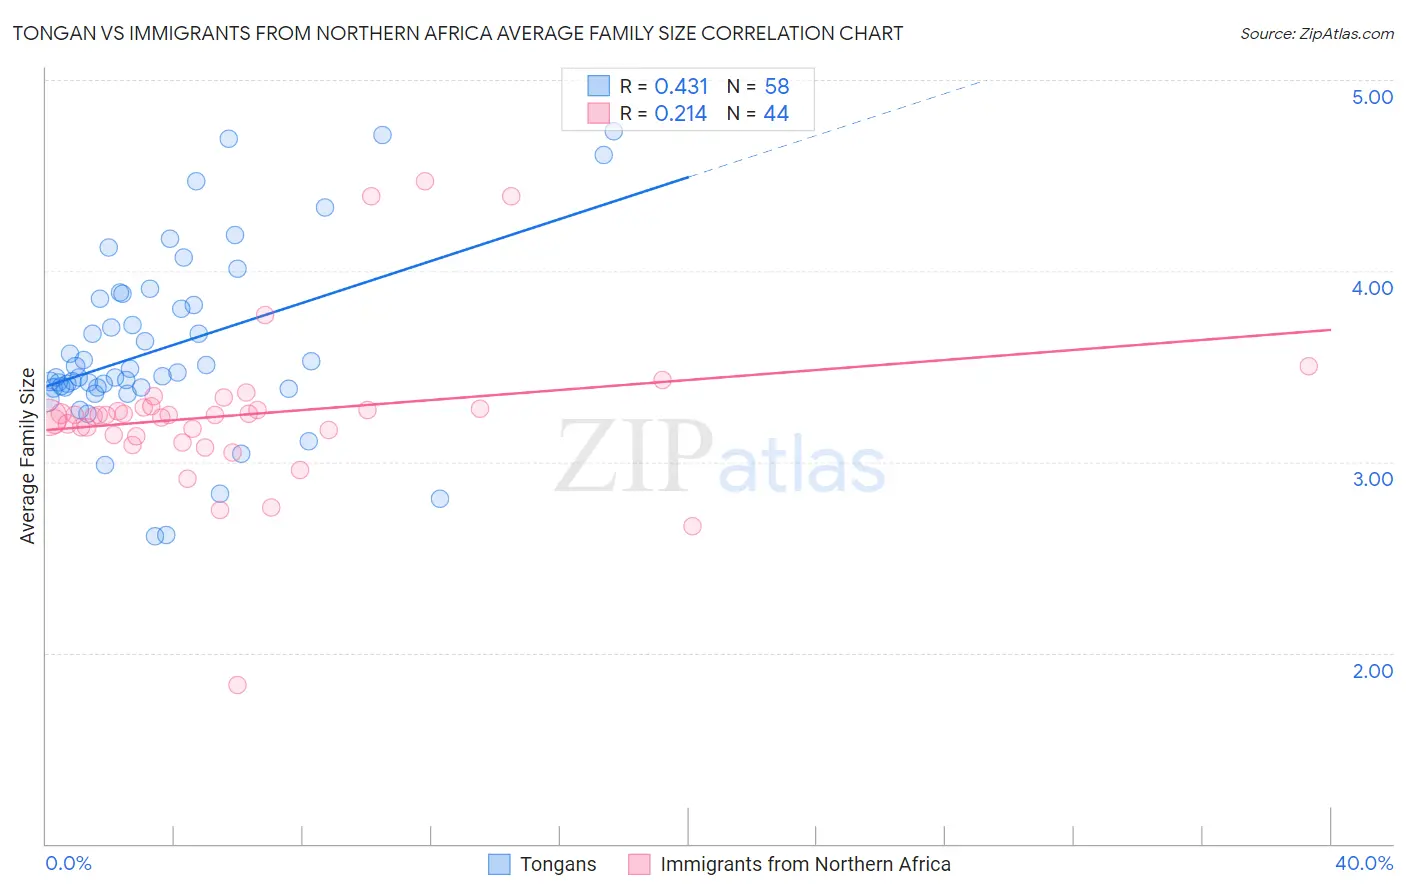 Tongan vs Immigrants from Northern Africa Average Family Size